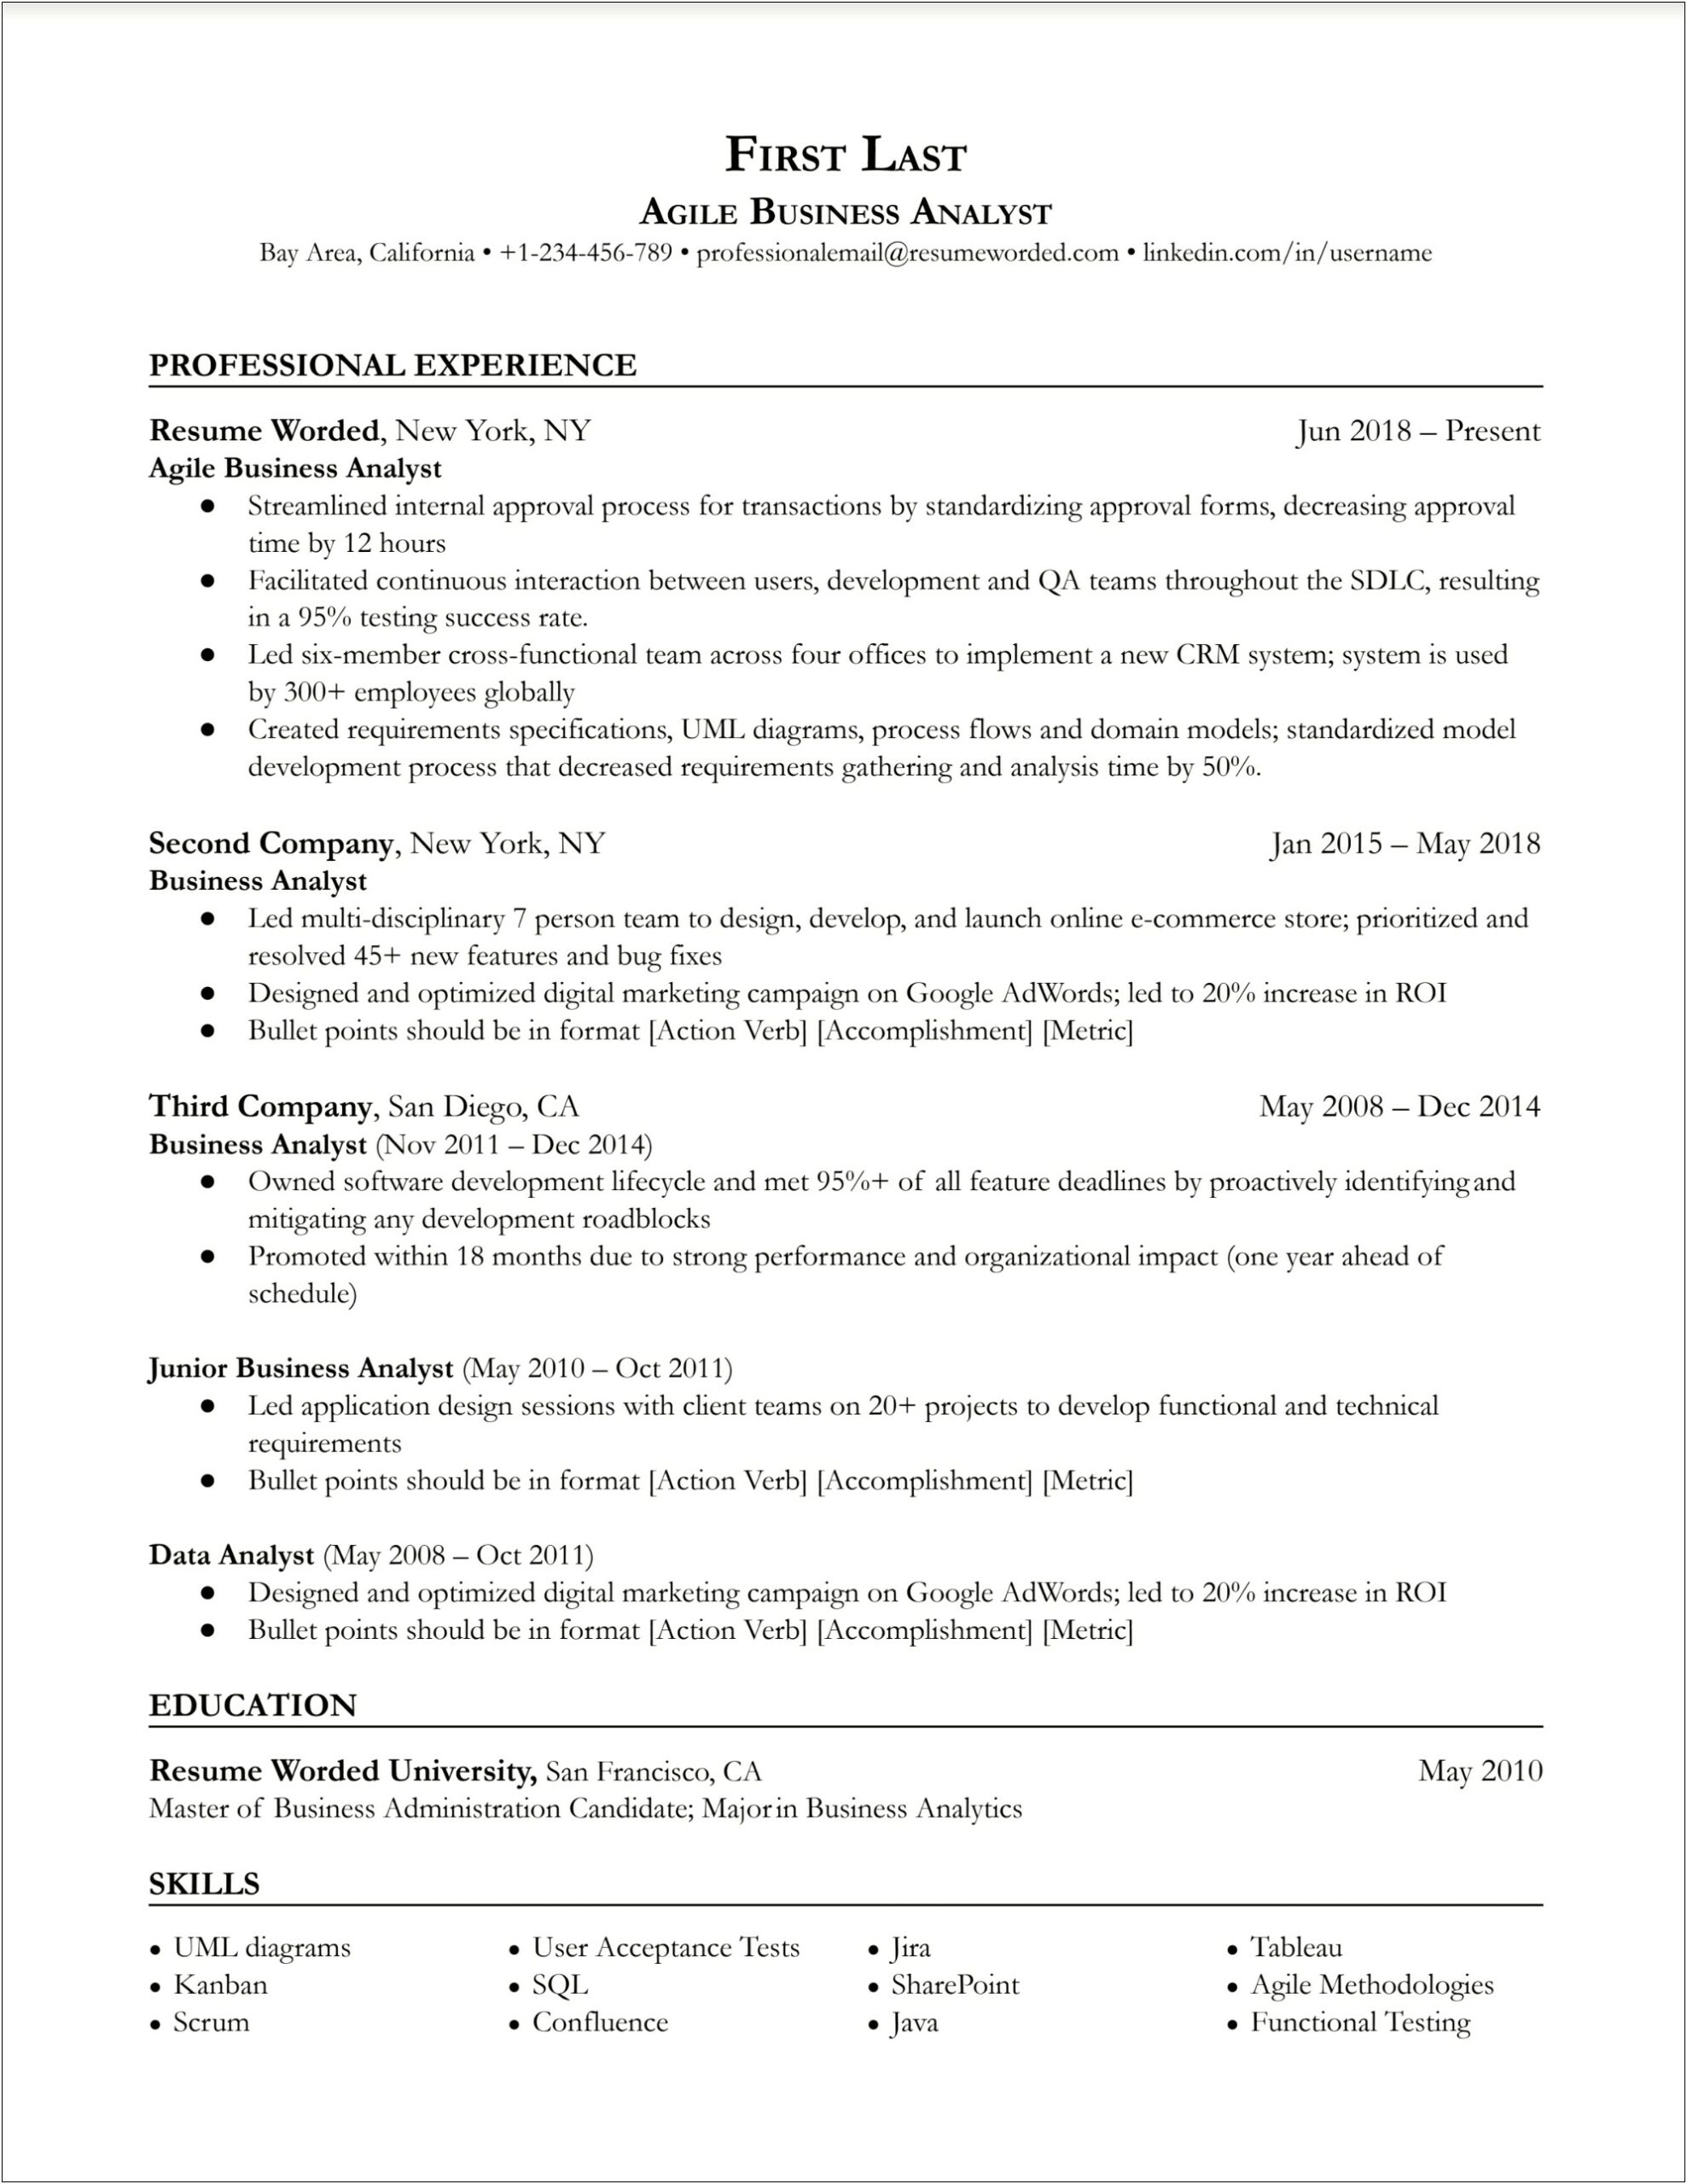 Business Analyst Resume Skills Section